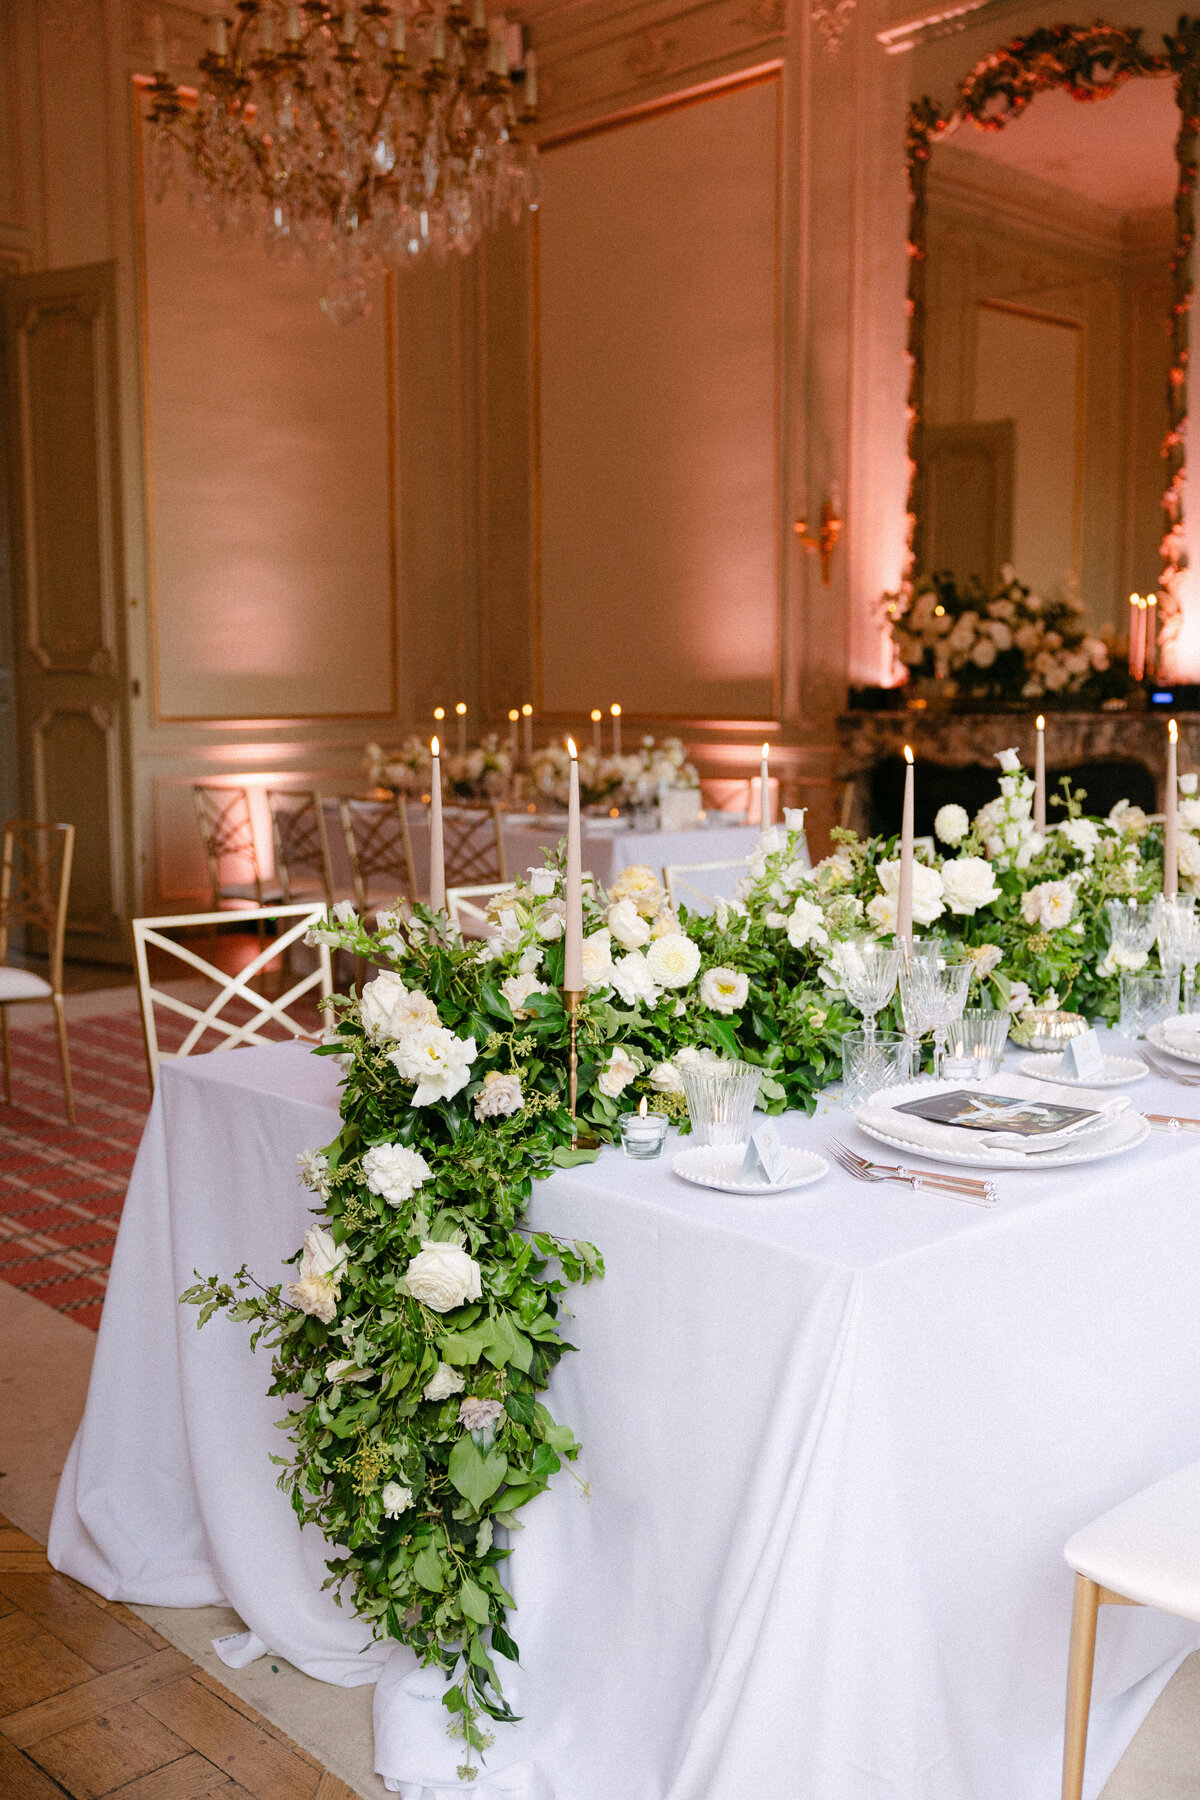 Jennifer Fox Weddings English speaking wedding planning & design agency in France crafting refined and bespoke weddings and celebrations Provence, Paris and destination wd797